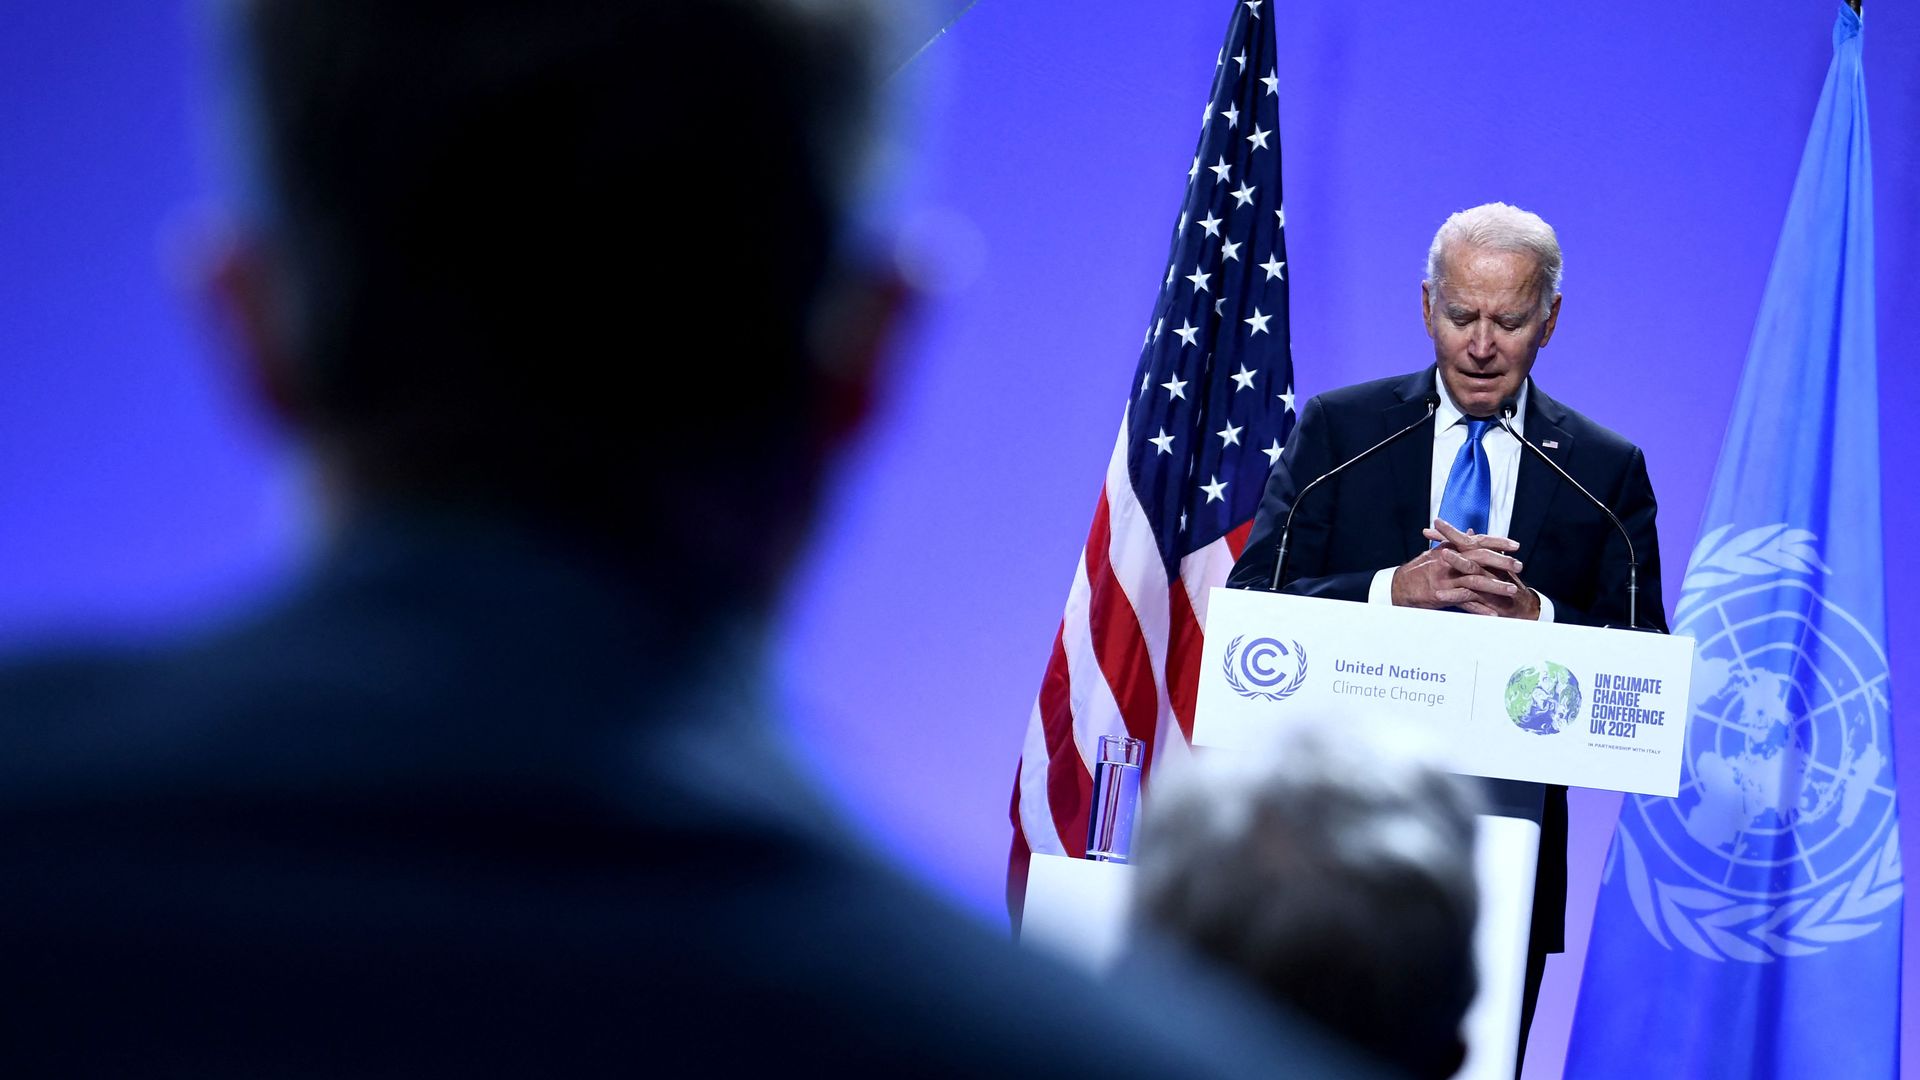 President Biden is seen speaking during a news conference on Tuesday.